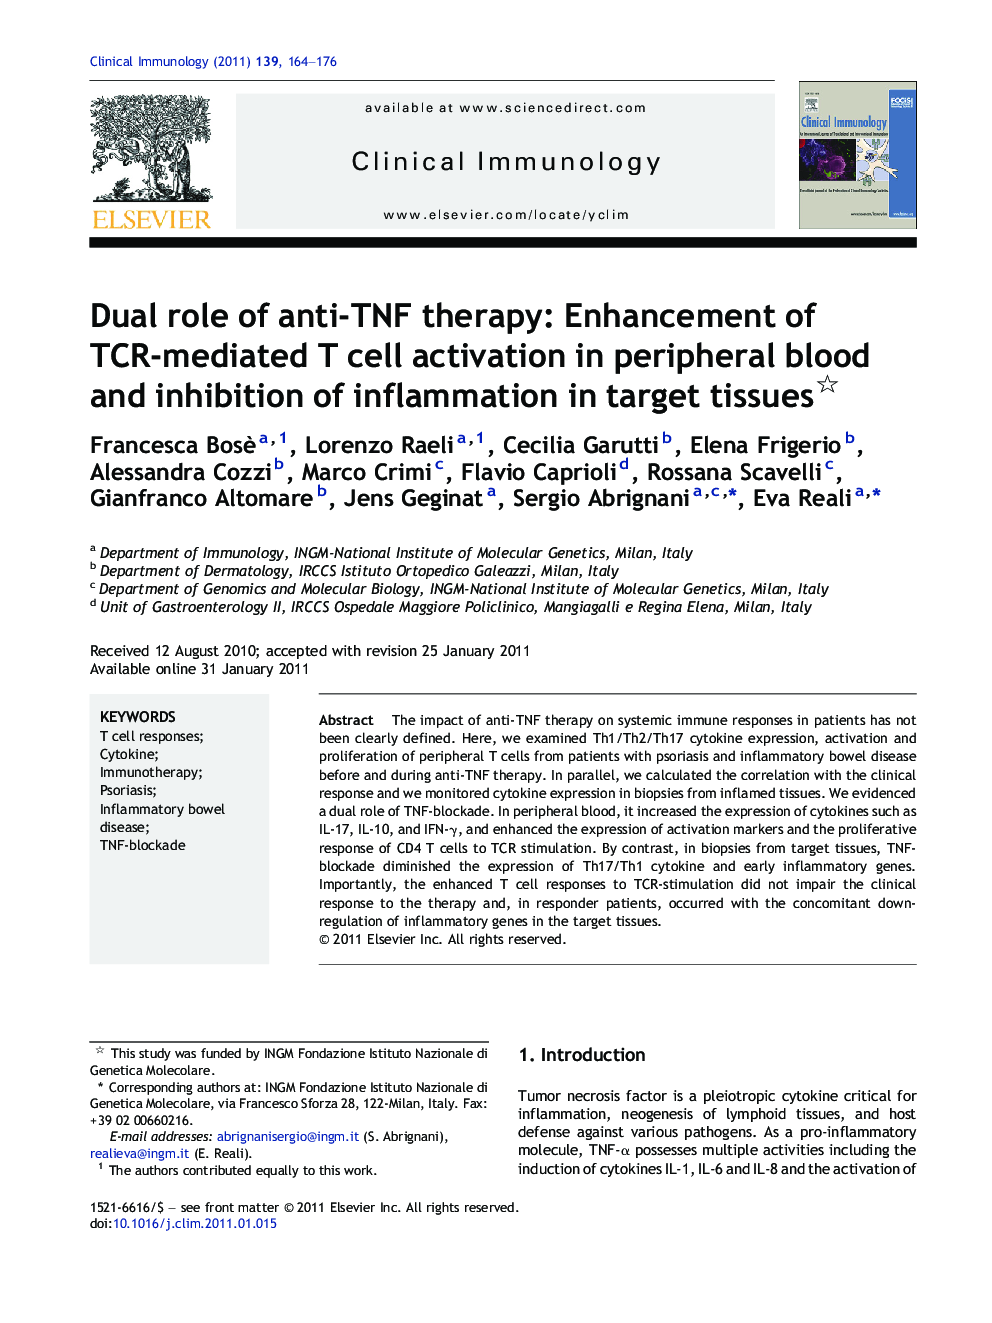 Dual role of anti-TNF therapy: Enhancement of TCR-mediated T cell activation in peripheral blood and inhibition of inflammation in target tissues 